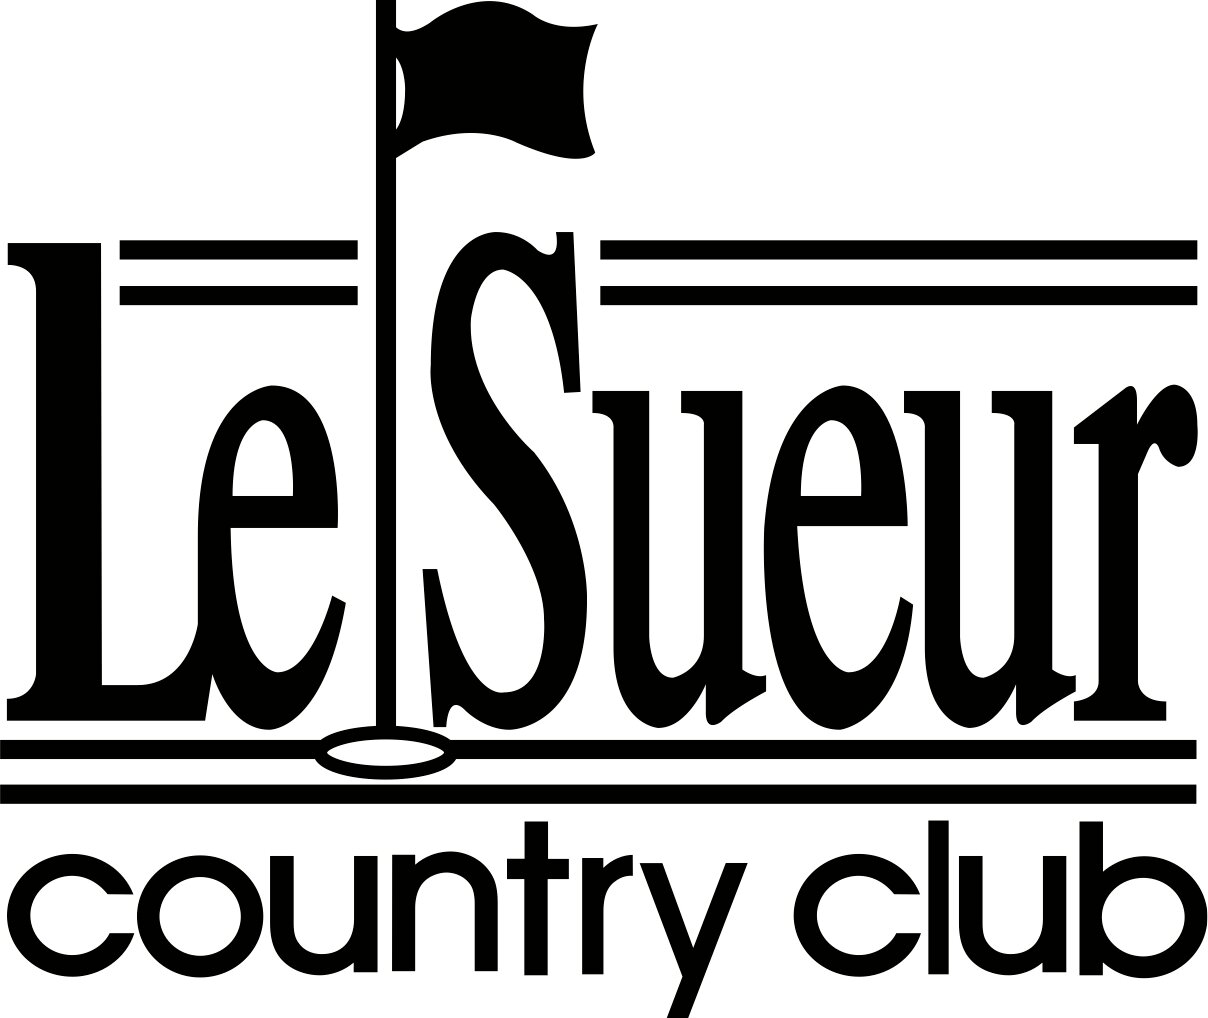 Le Sueur Country Club located approximately 3 miles southeast of Le Sueur. We offer a beautiful 18 hole golf course, swimming pool, and club house.